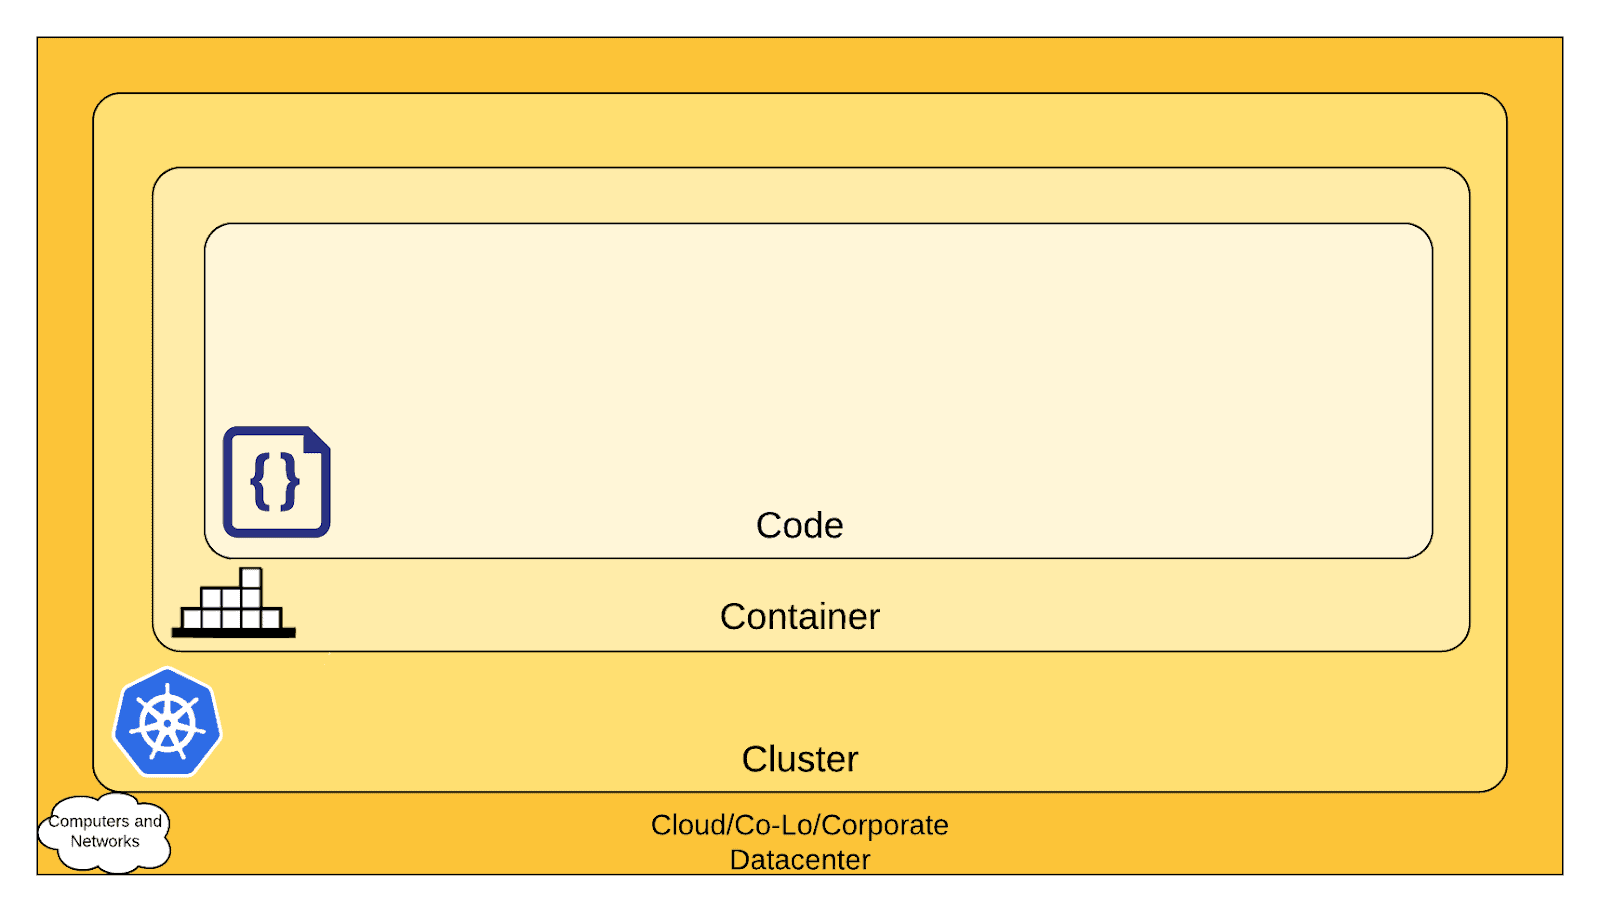 The 4C's of Cloud Native Security (code, container, cluster, cloud/co-lo/corporate datacenter)